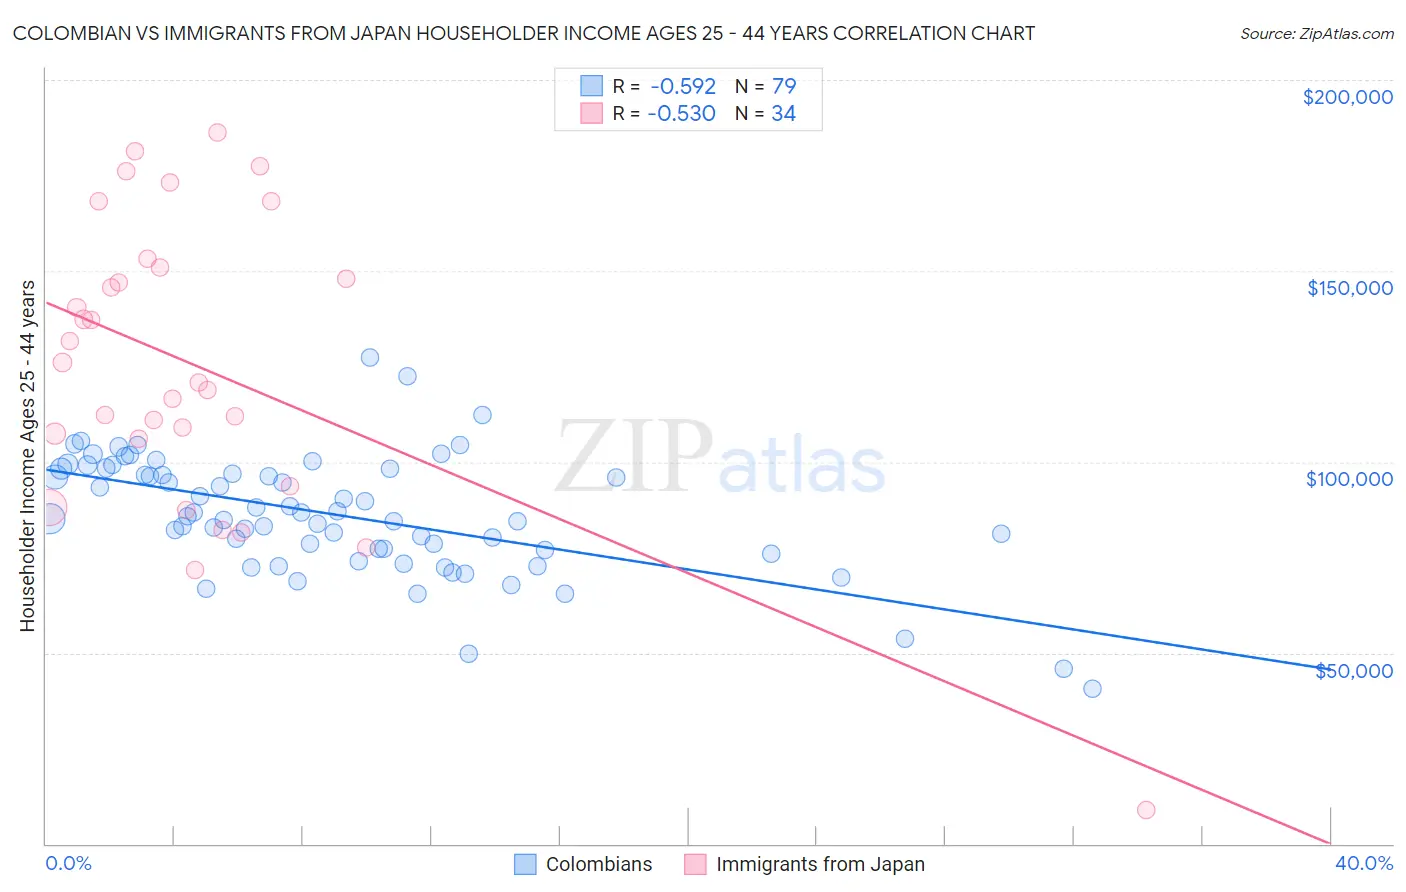 Colombian vs Immigrants from Japan Householder Income Ages 25 - 44 years